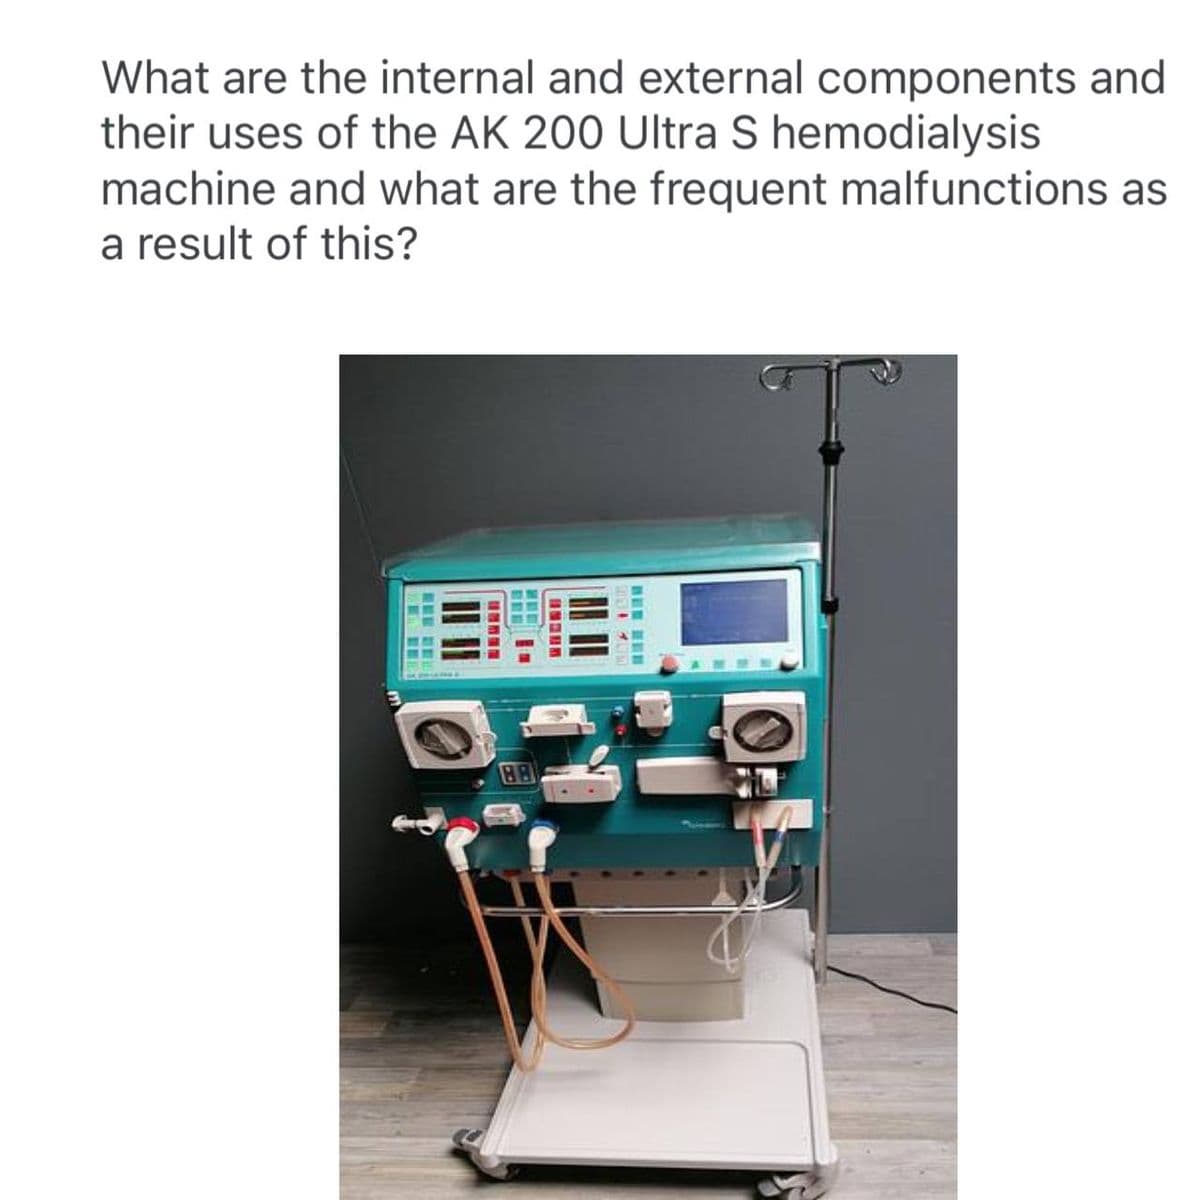 What are the internal and external components and
their uses of the AK 200 Ultra S hemodialysis
machine and what are the frequent malfunctions as
a result of this?
SWEET
188
130 1300